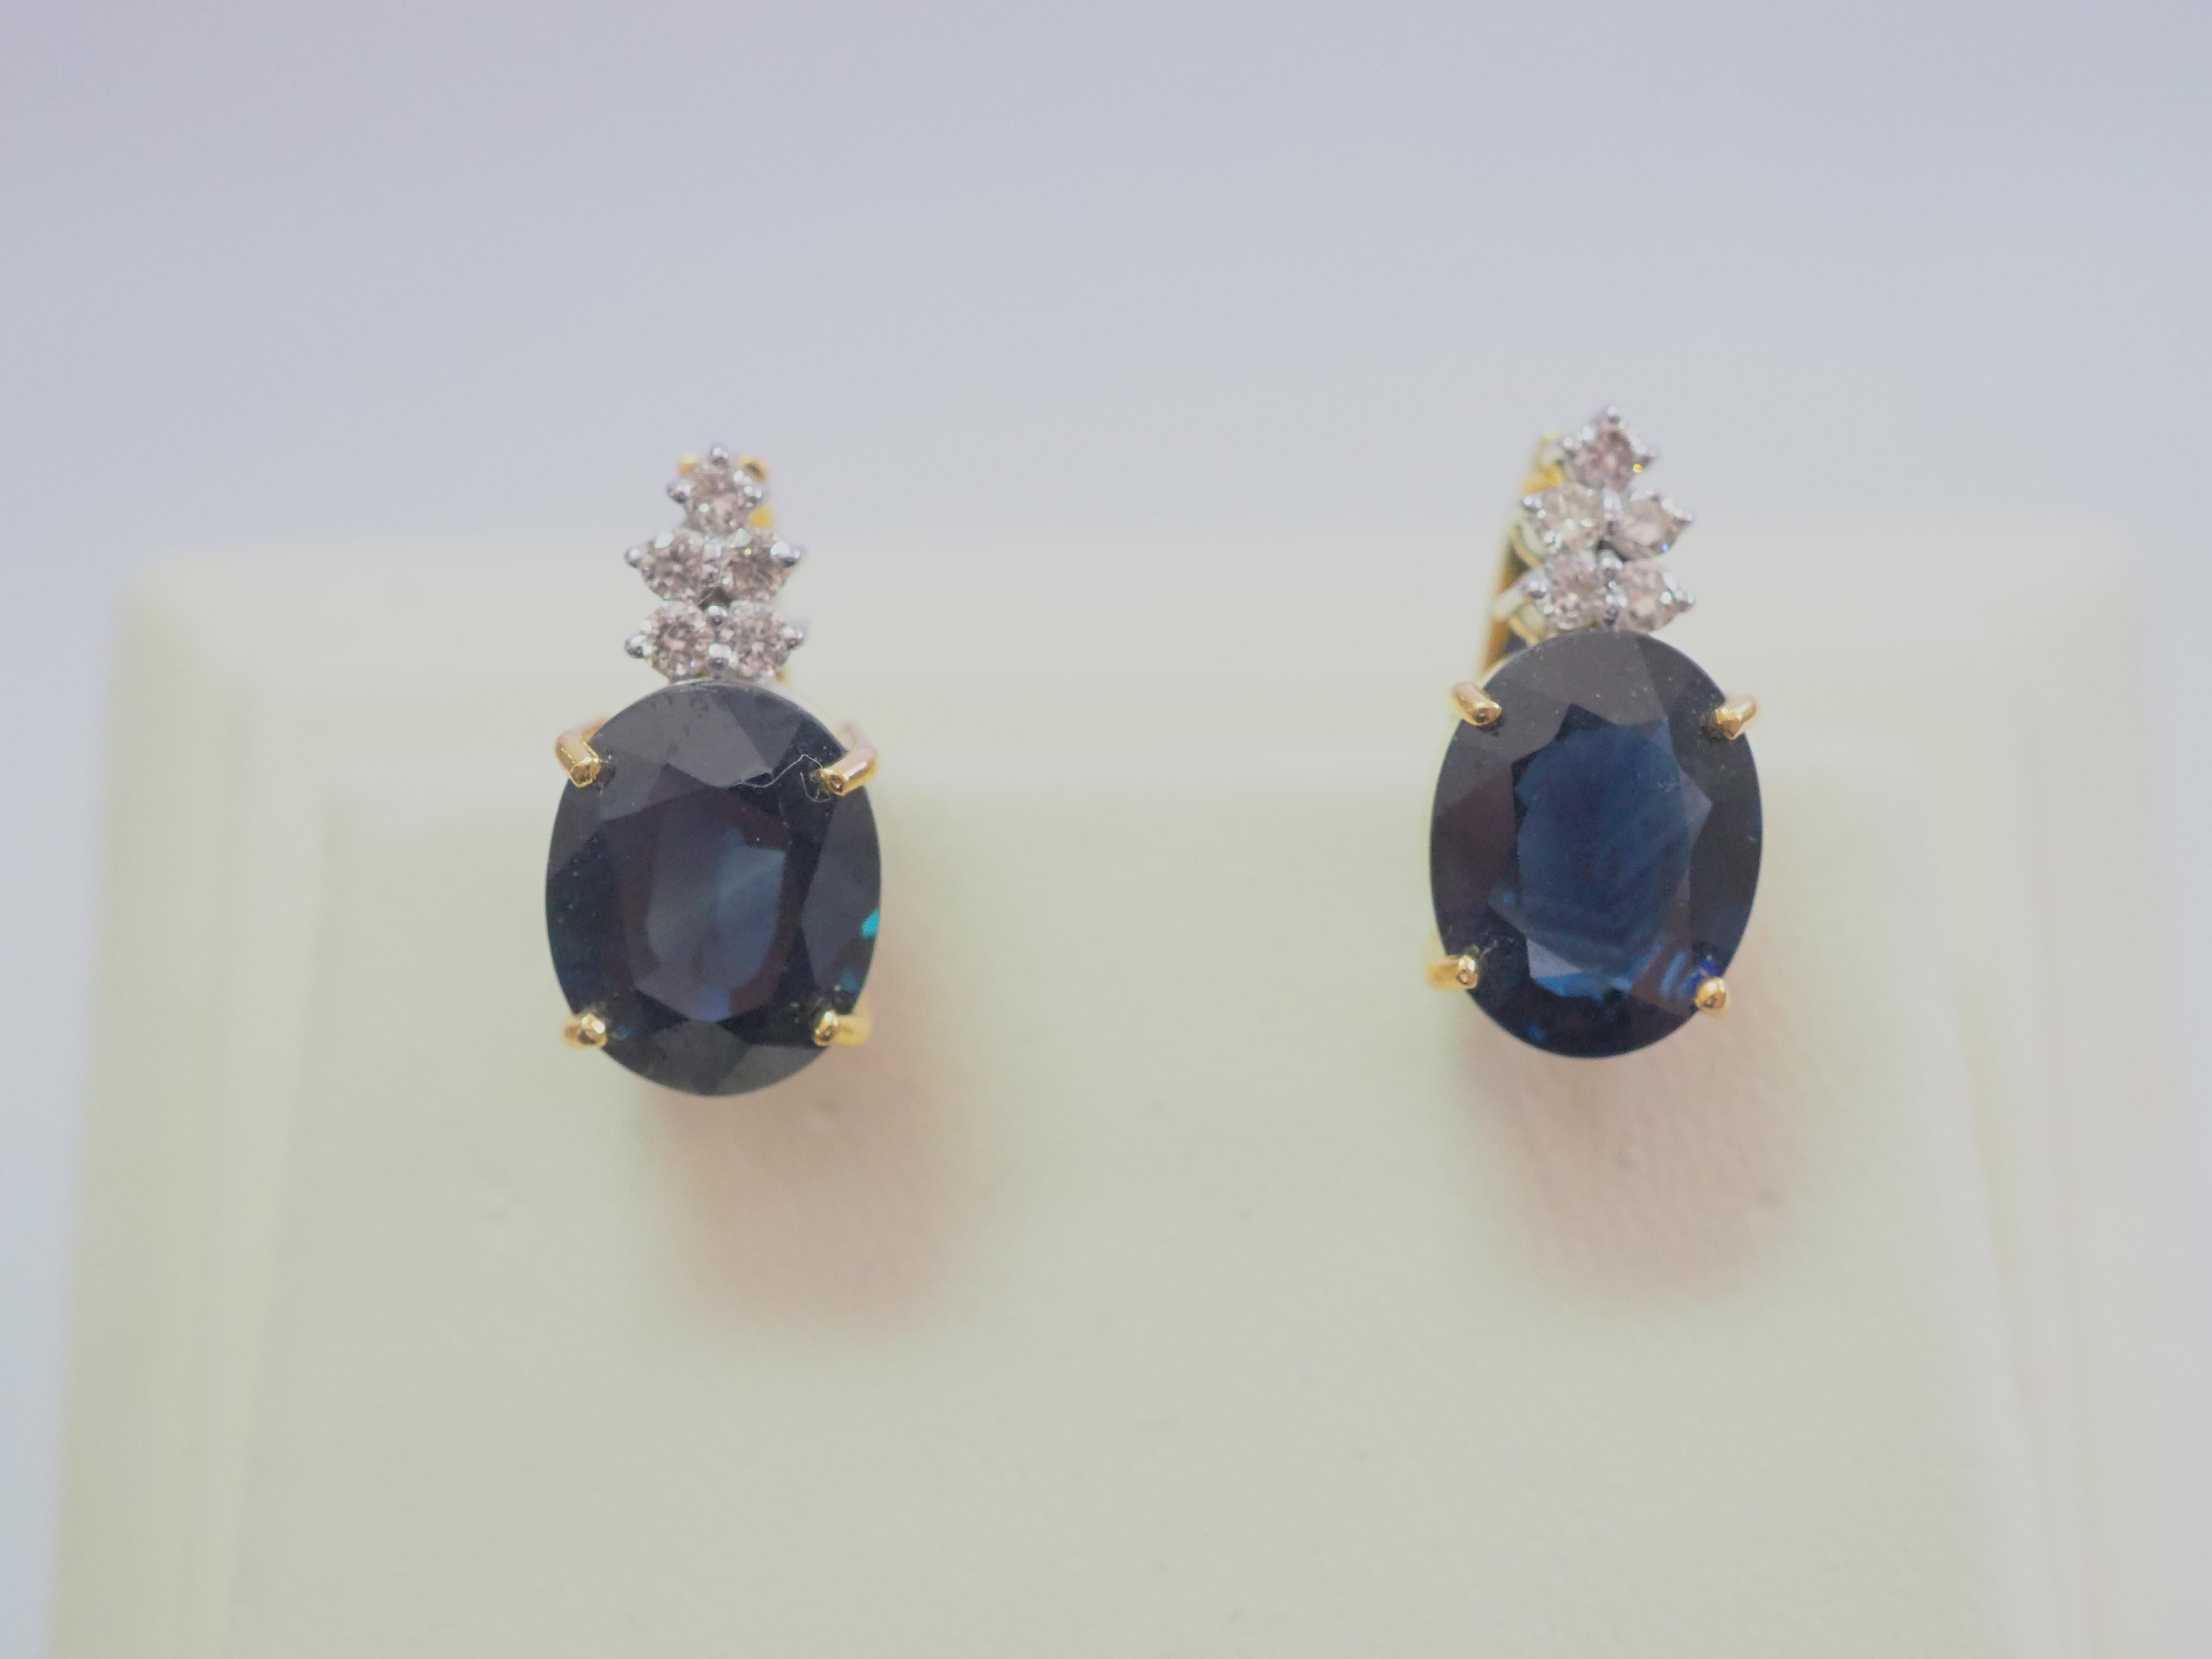 Presented here is a fine and gorgeous deep blue sapphire and diamond cocktail latch-back earrings. The oval deep blue sapphire has the color that is distinctive and dark tone with moderate saturation of blue which is at this size quite rare and